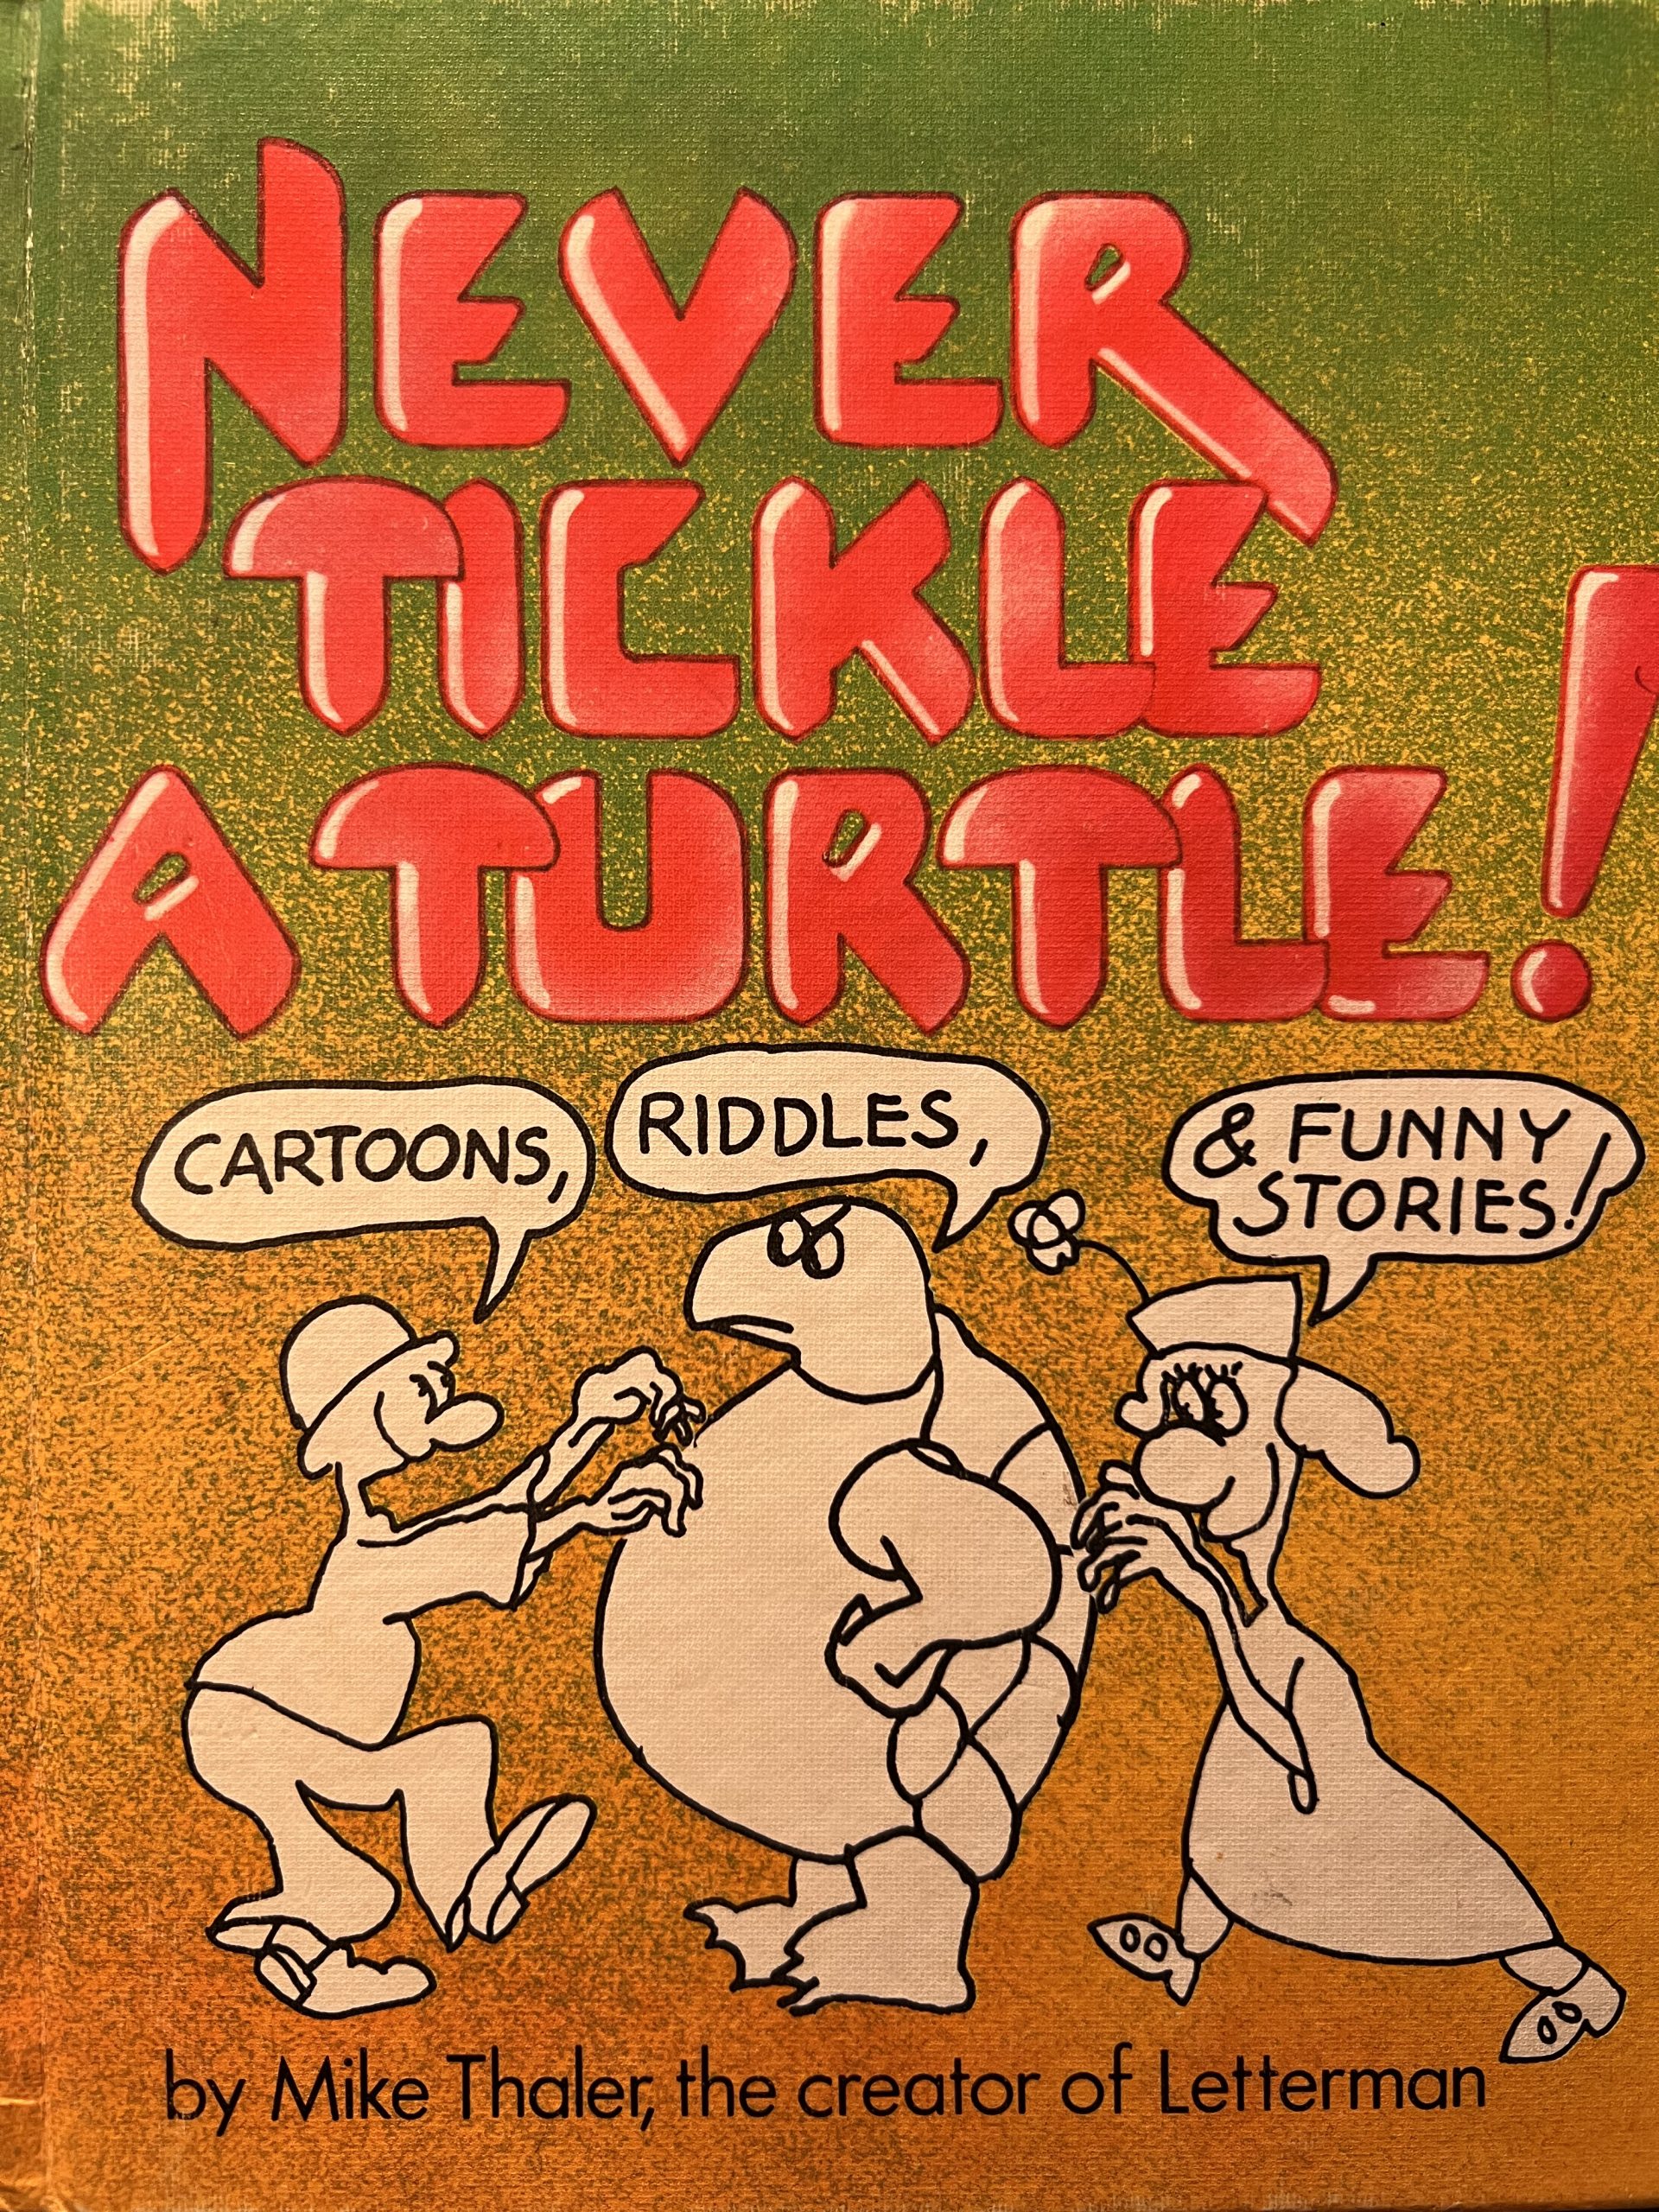 Can You Tickle a Turtle? [Book]